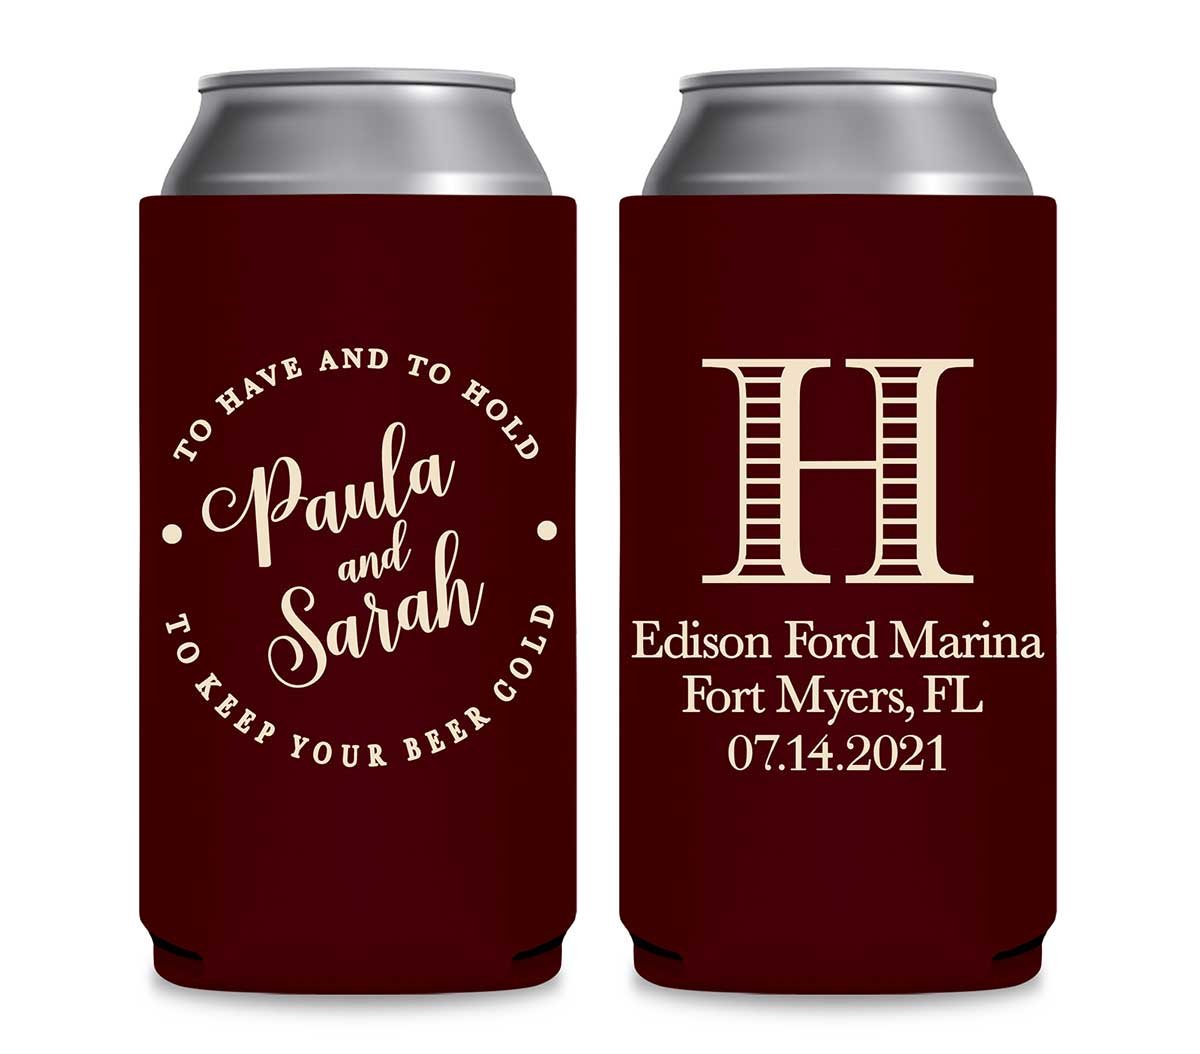 To Have & To Hold Keep Your Beer Cold 3A Foldable 12 oz Slim Can Koozies Wedding Gifts for Guests